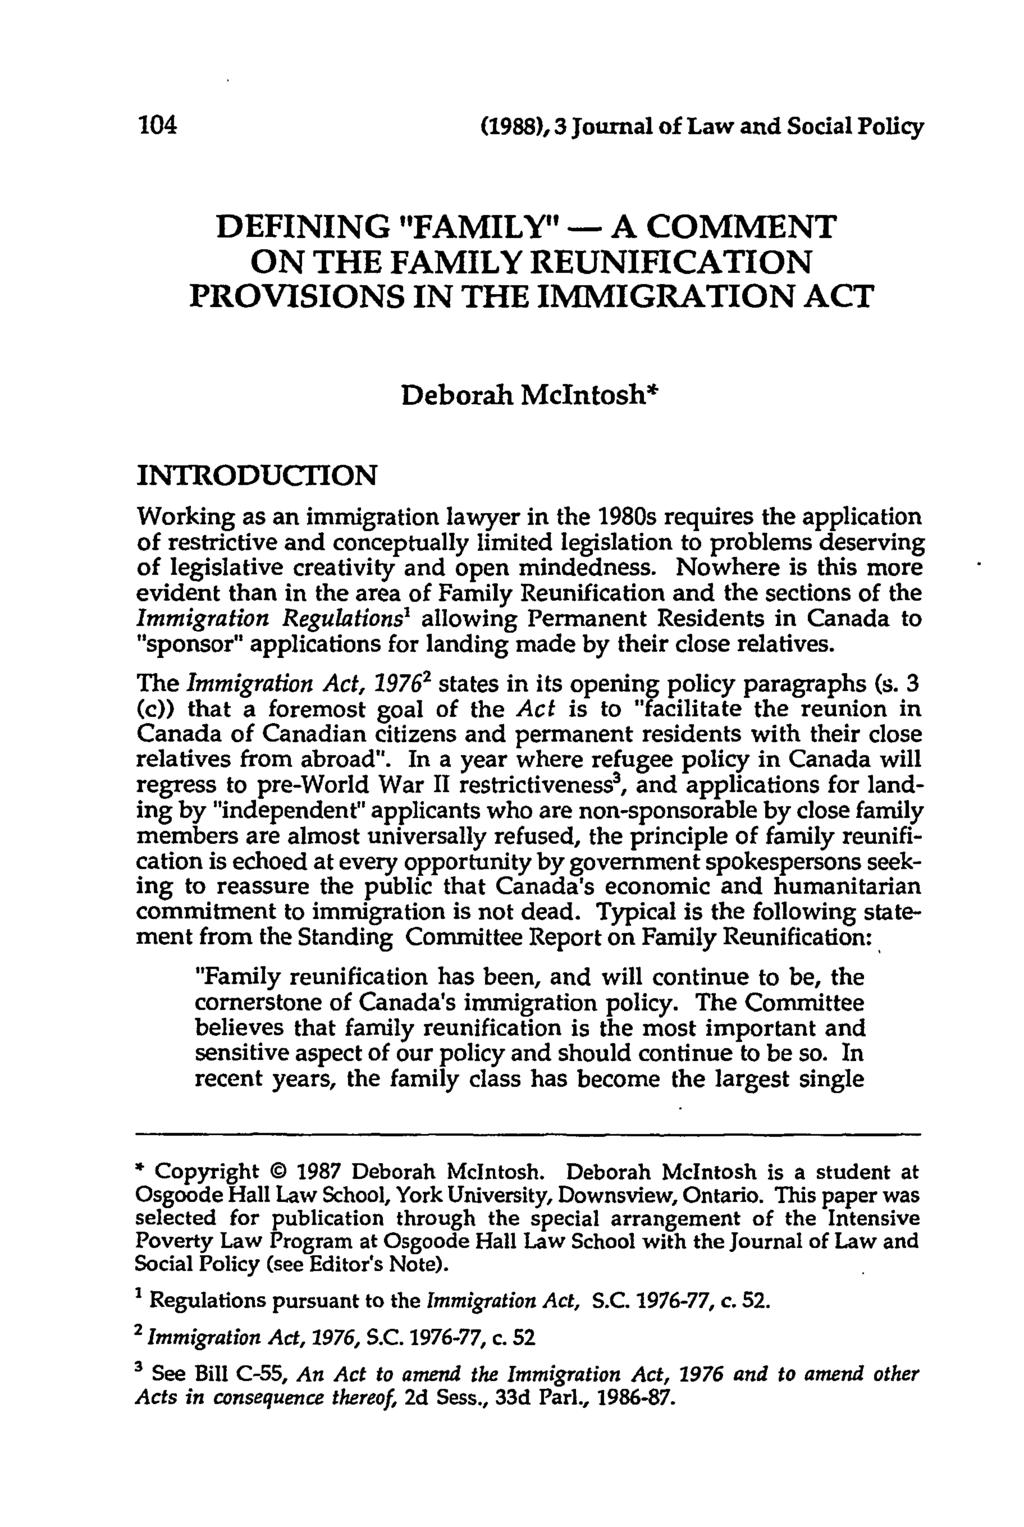 (1988), 3 Journal of Law and Social Policy DEFINING "FAMILY" - A COMMENT ON THE FAMILY REUNIFICATION PROVISIONS IN THE IMMIGRATION ACT Deborah McIntosh* INTRODUCTION Working as an immigration lawyer